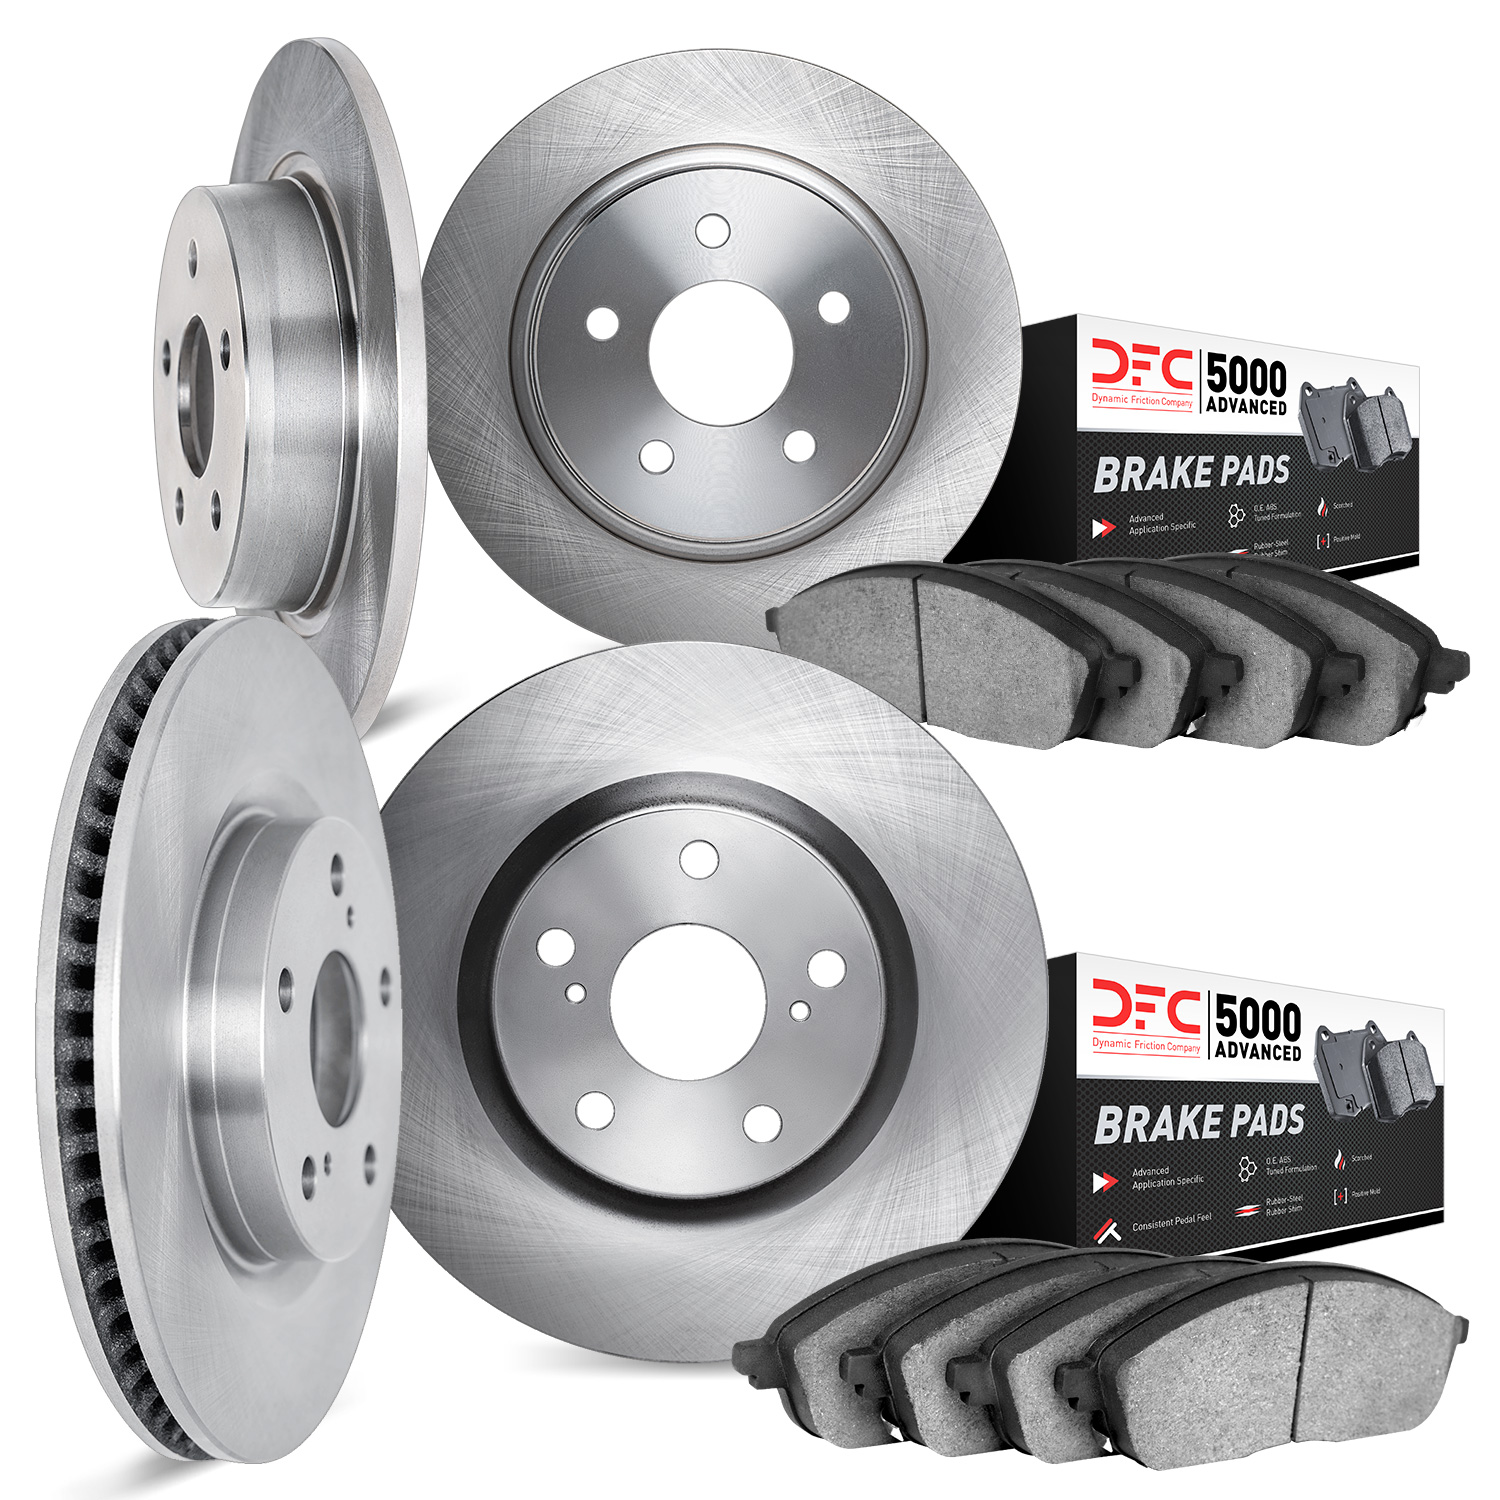 6504-92000 Brake Rotors w/5000 Advanced Brake Pads Kit, 2007-2012 BMW, Position: Front and Rear